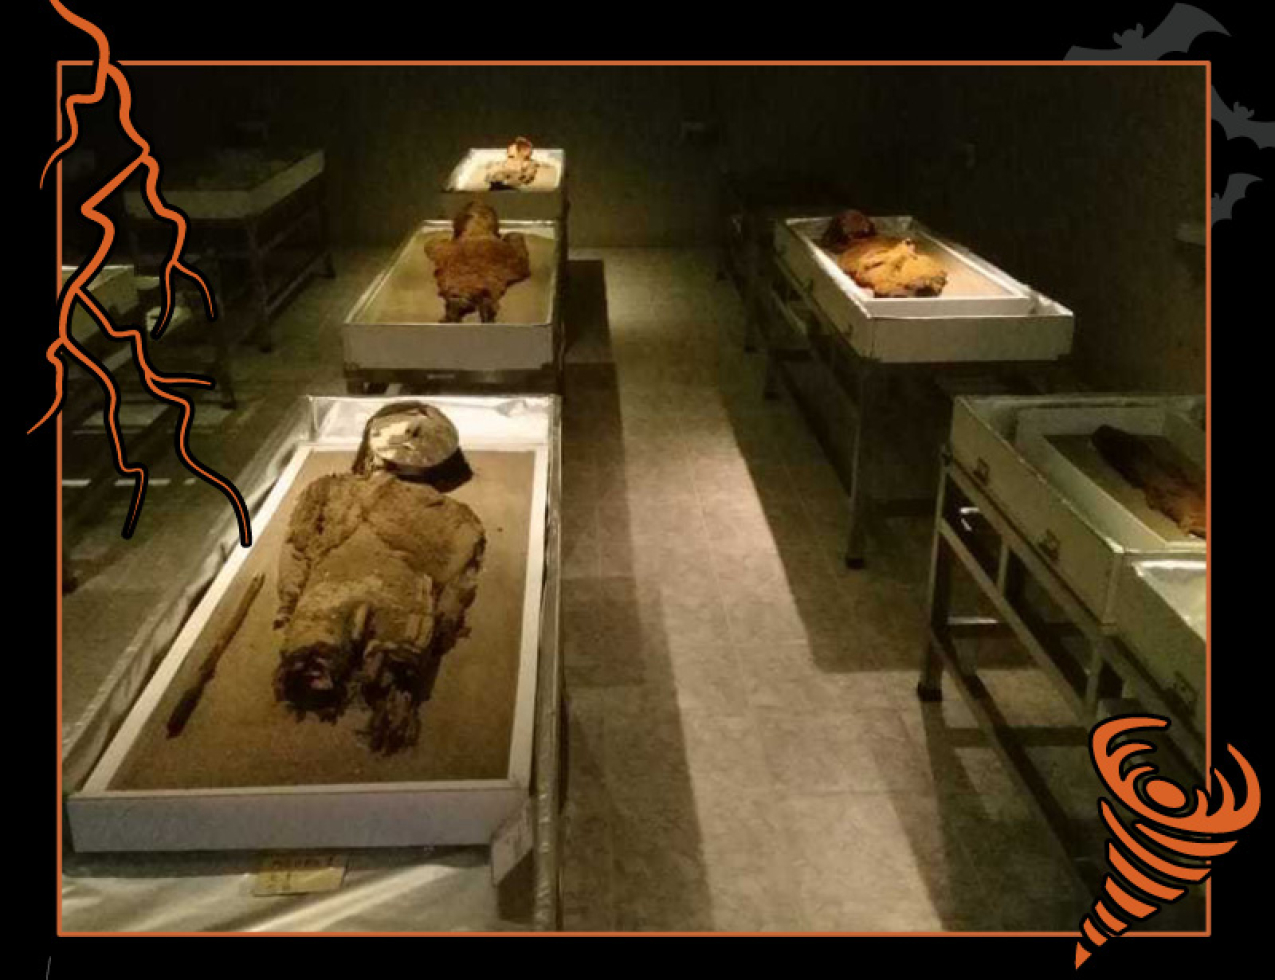 A museum room with mummies displayed on tables. Border of the photo is black with orange atmospheric graphics of a lightning bolt and a tornado. Text: The mystery of the oozing mummies, #NOAASpookyScience with NOAA logo.